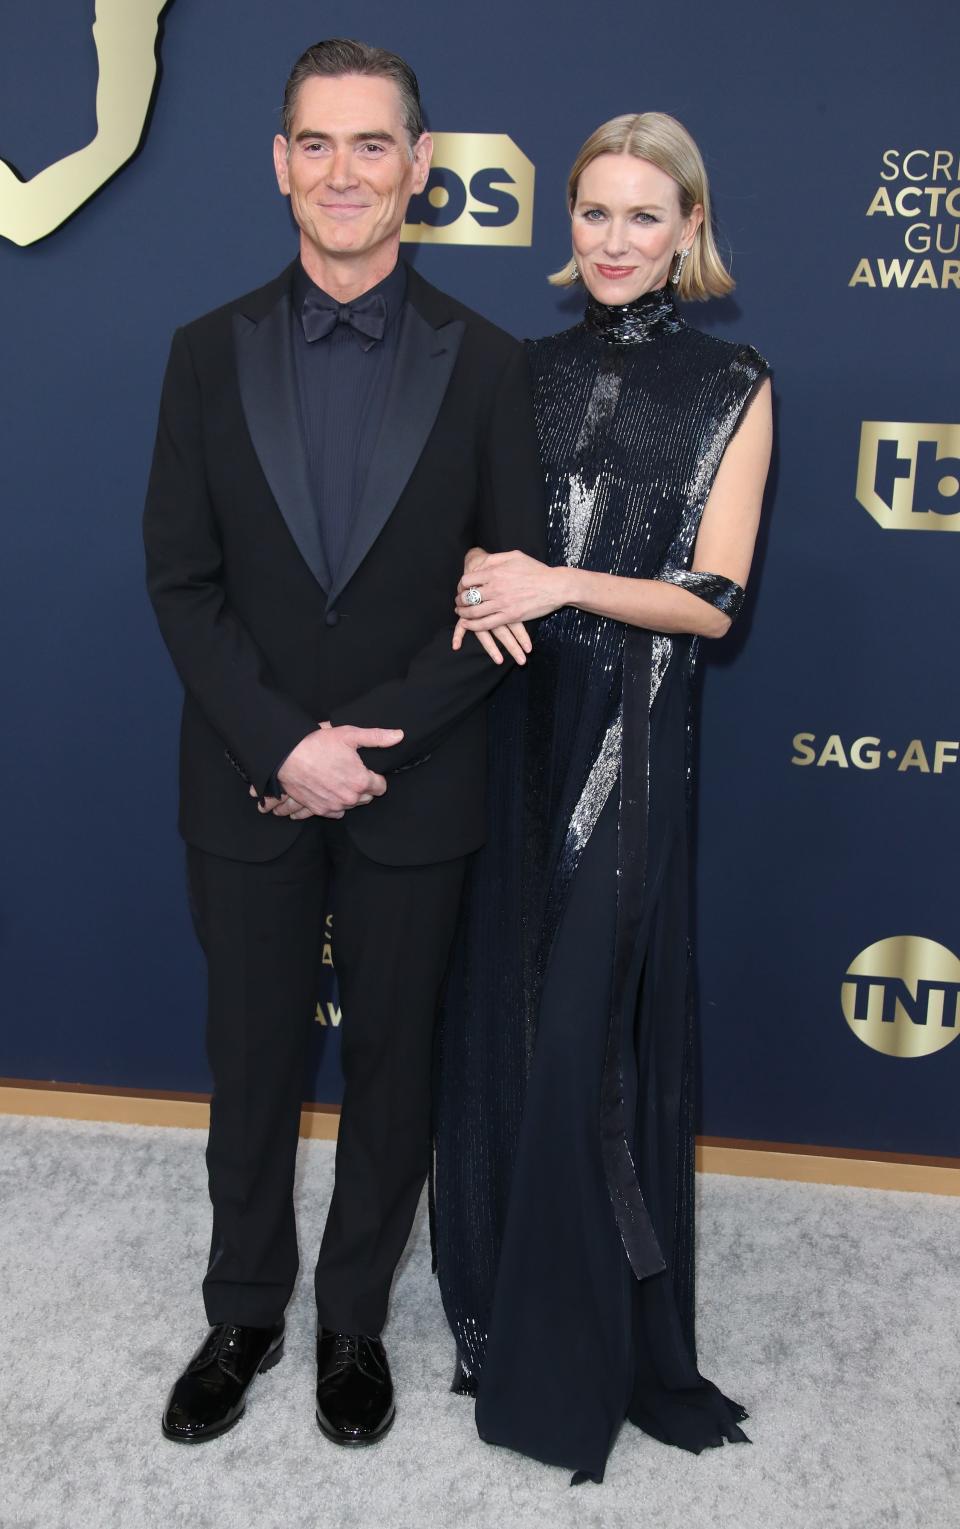 Billy Crudup and Naomi Watts on the carpet for the Screen Actors Guild Awards in 2022.